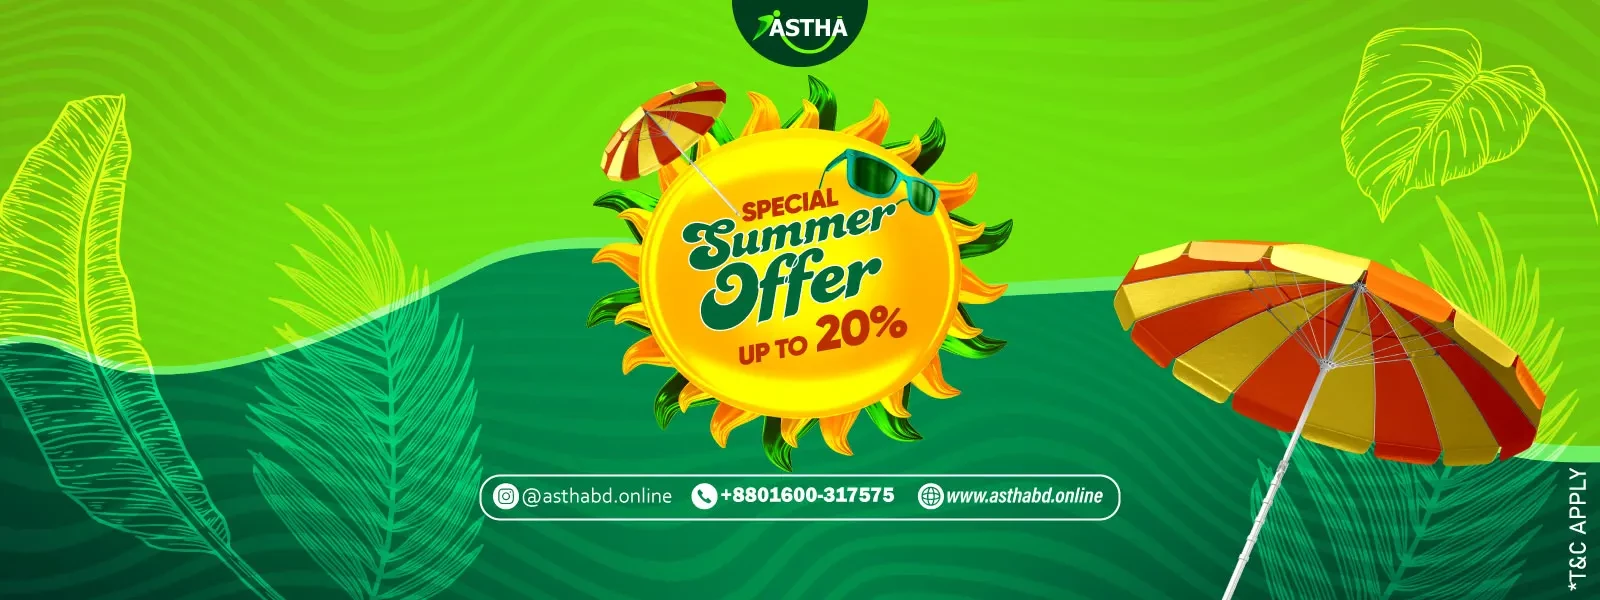 ASTHA - Summer Special Offer | Grab Your Discount By Ordering Any Professional Services.